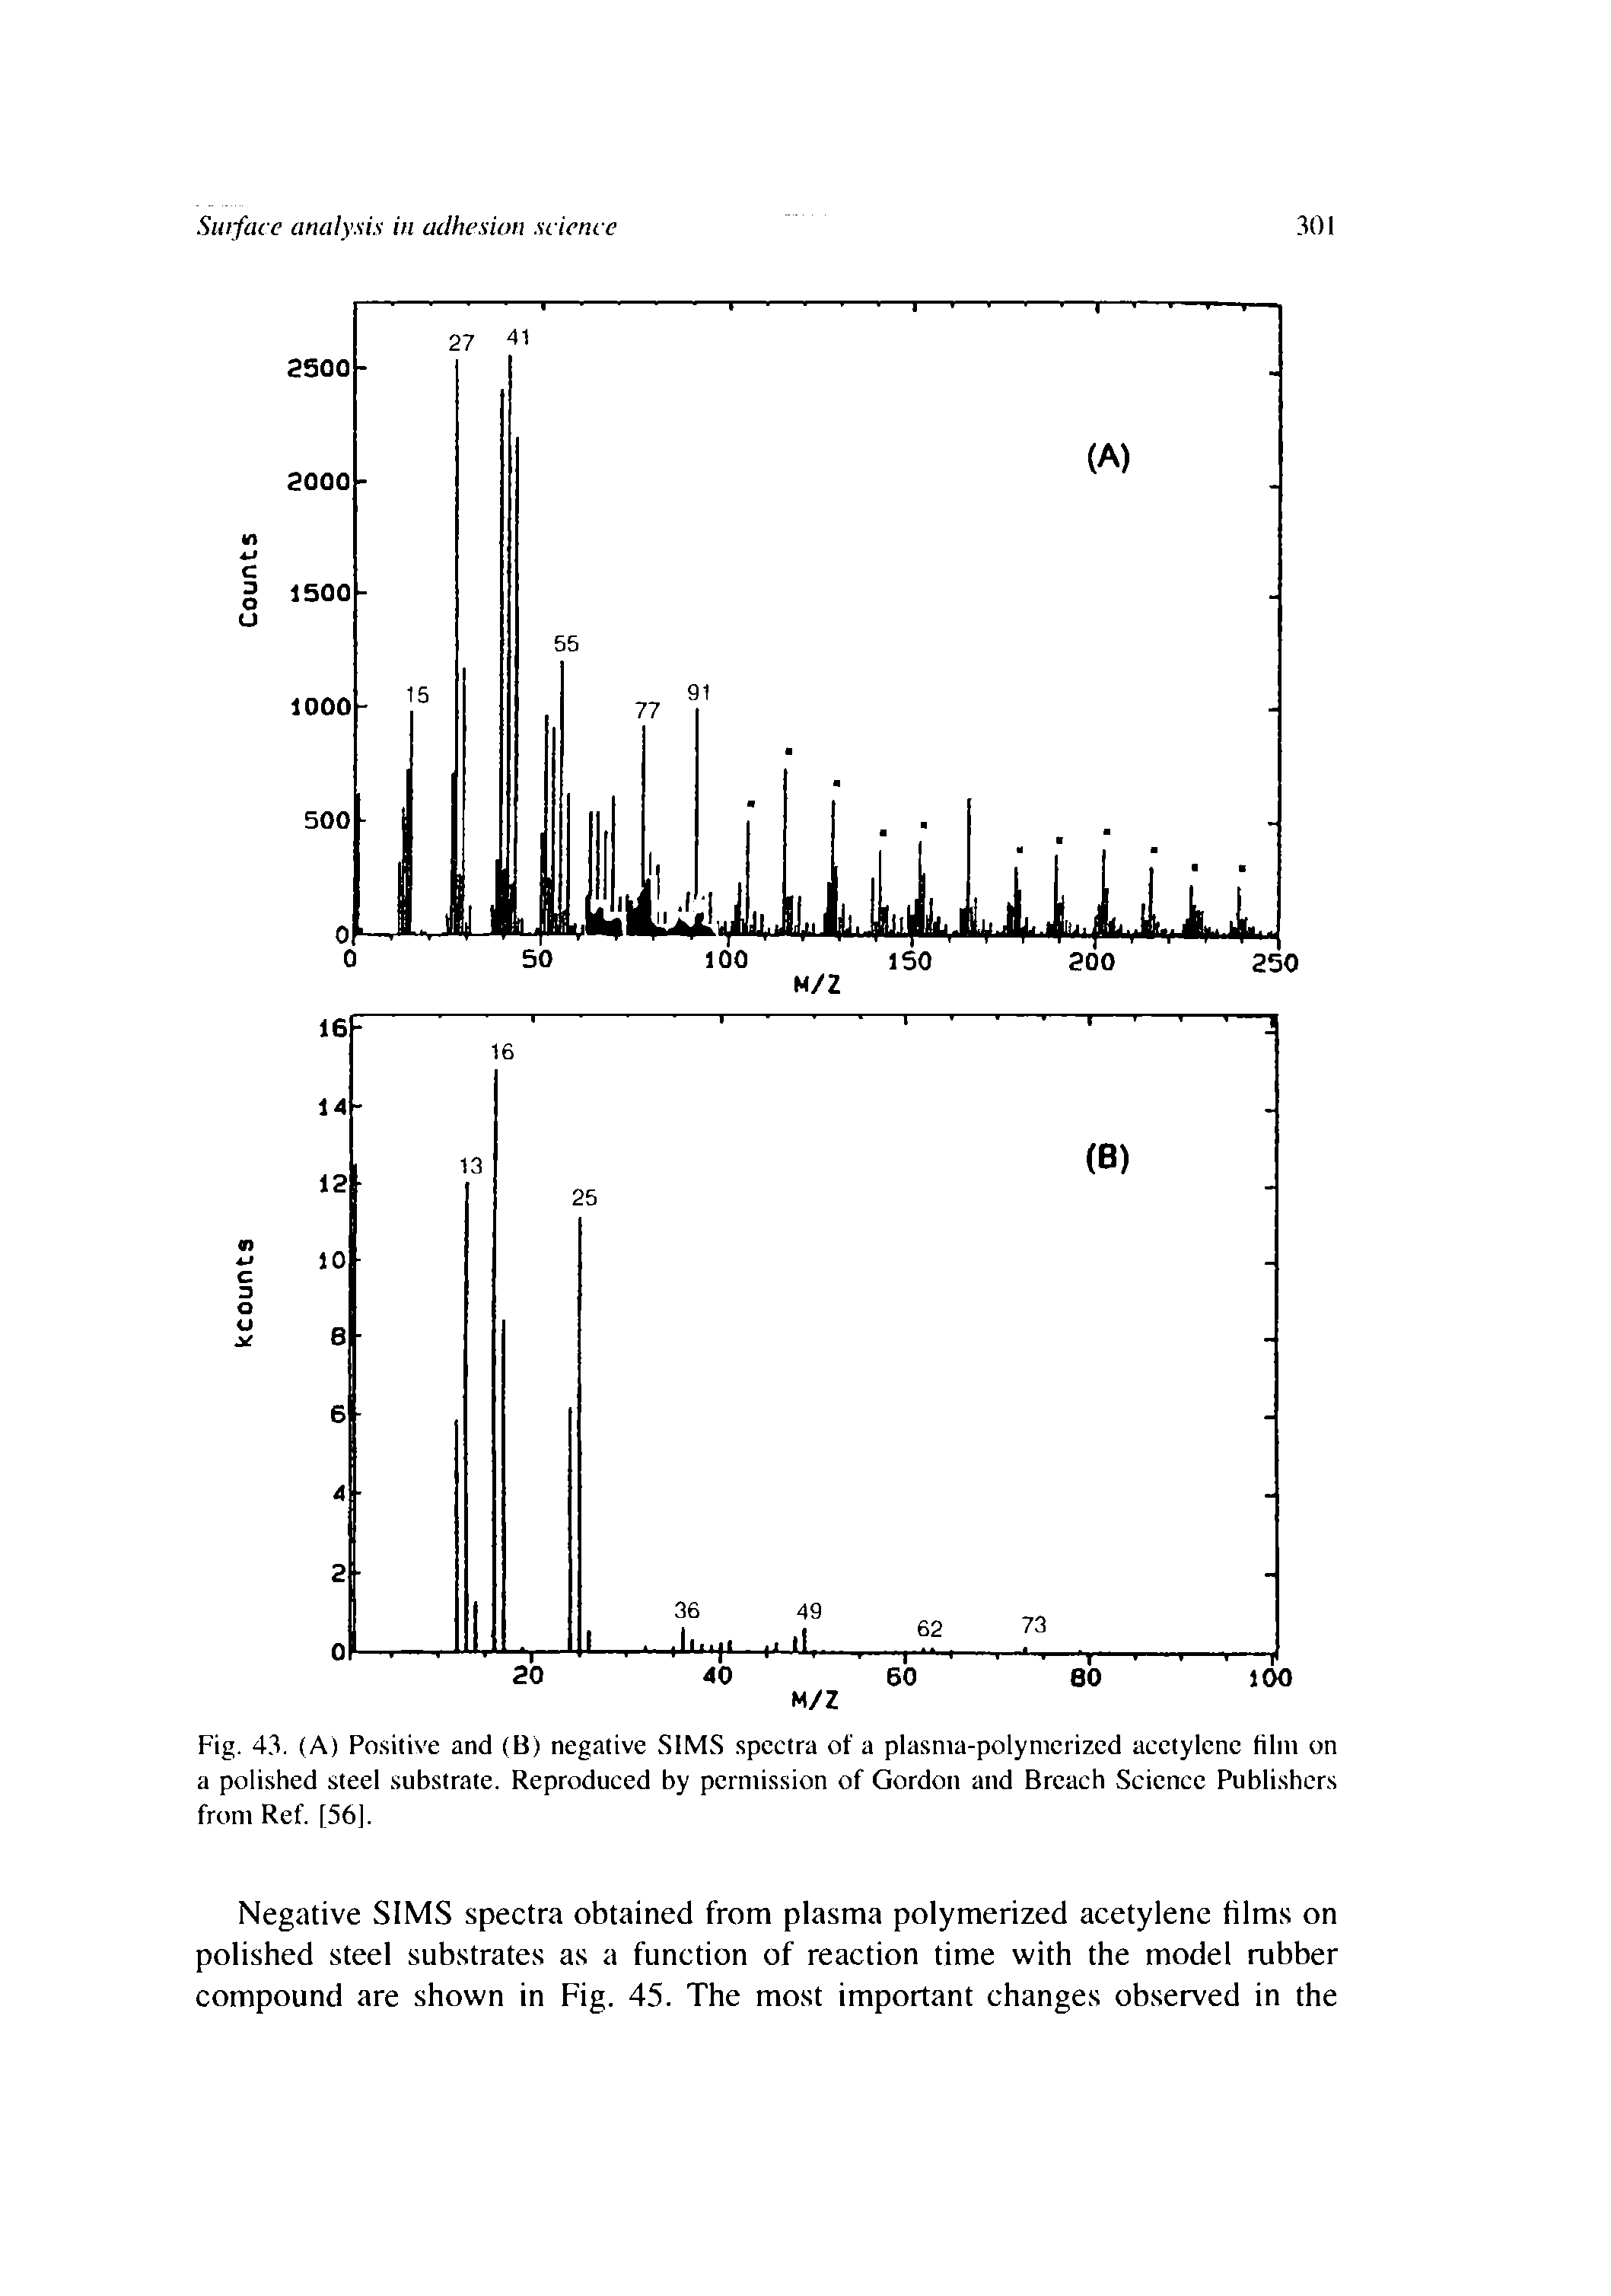 Fig. 43. (A) Po.sitive and (B) negative SIMS. spectra of a plasma-polymerized acetylene film on a polished steel substrate. Reproduced by permission of Gordon and Breach Science Publishers from Ref. [56].